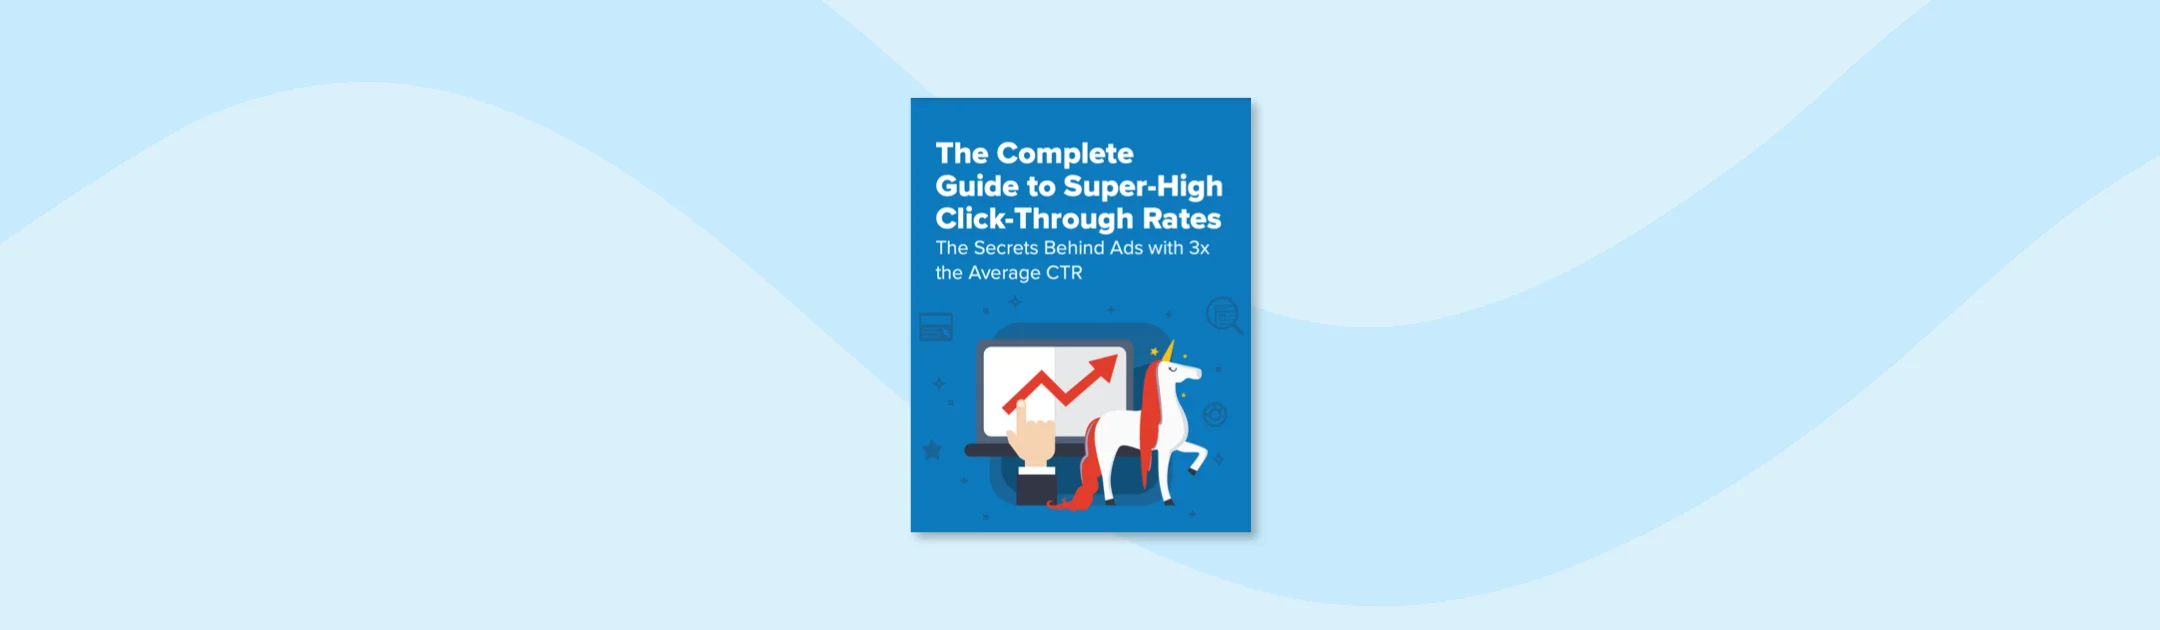 The Complete Guide to Super-High Click-Through Rates